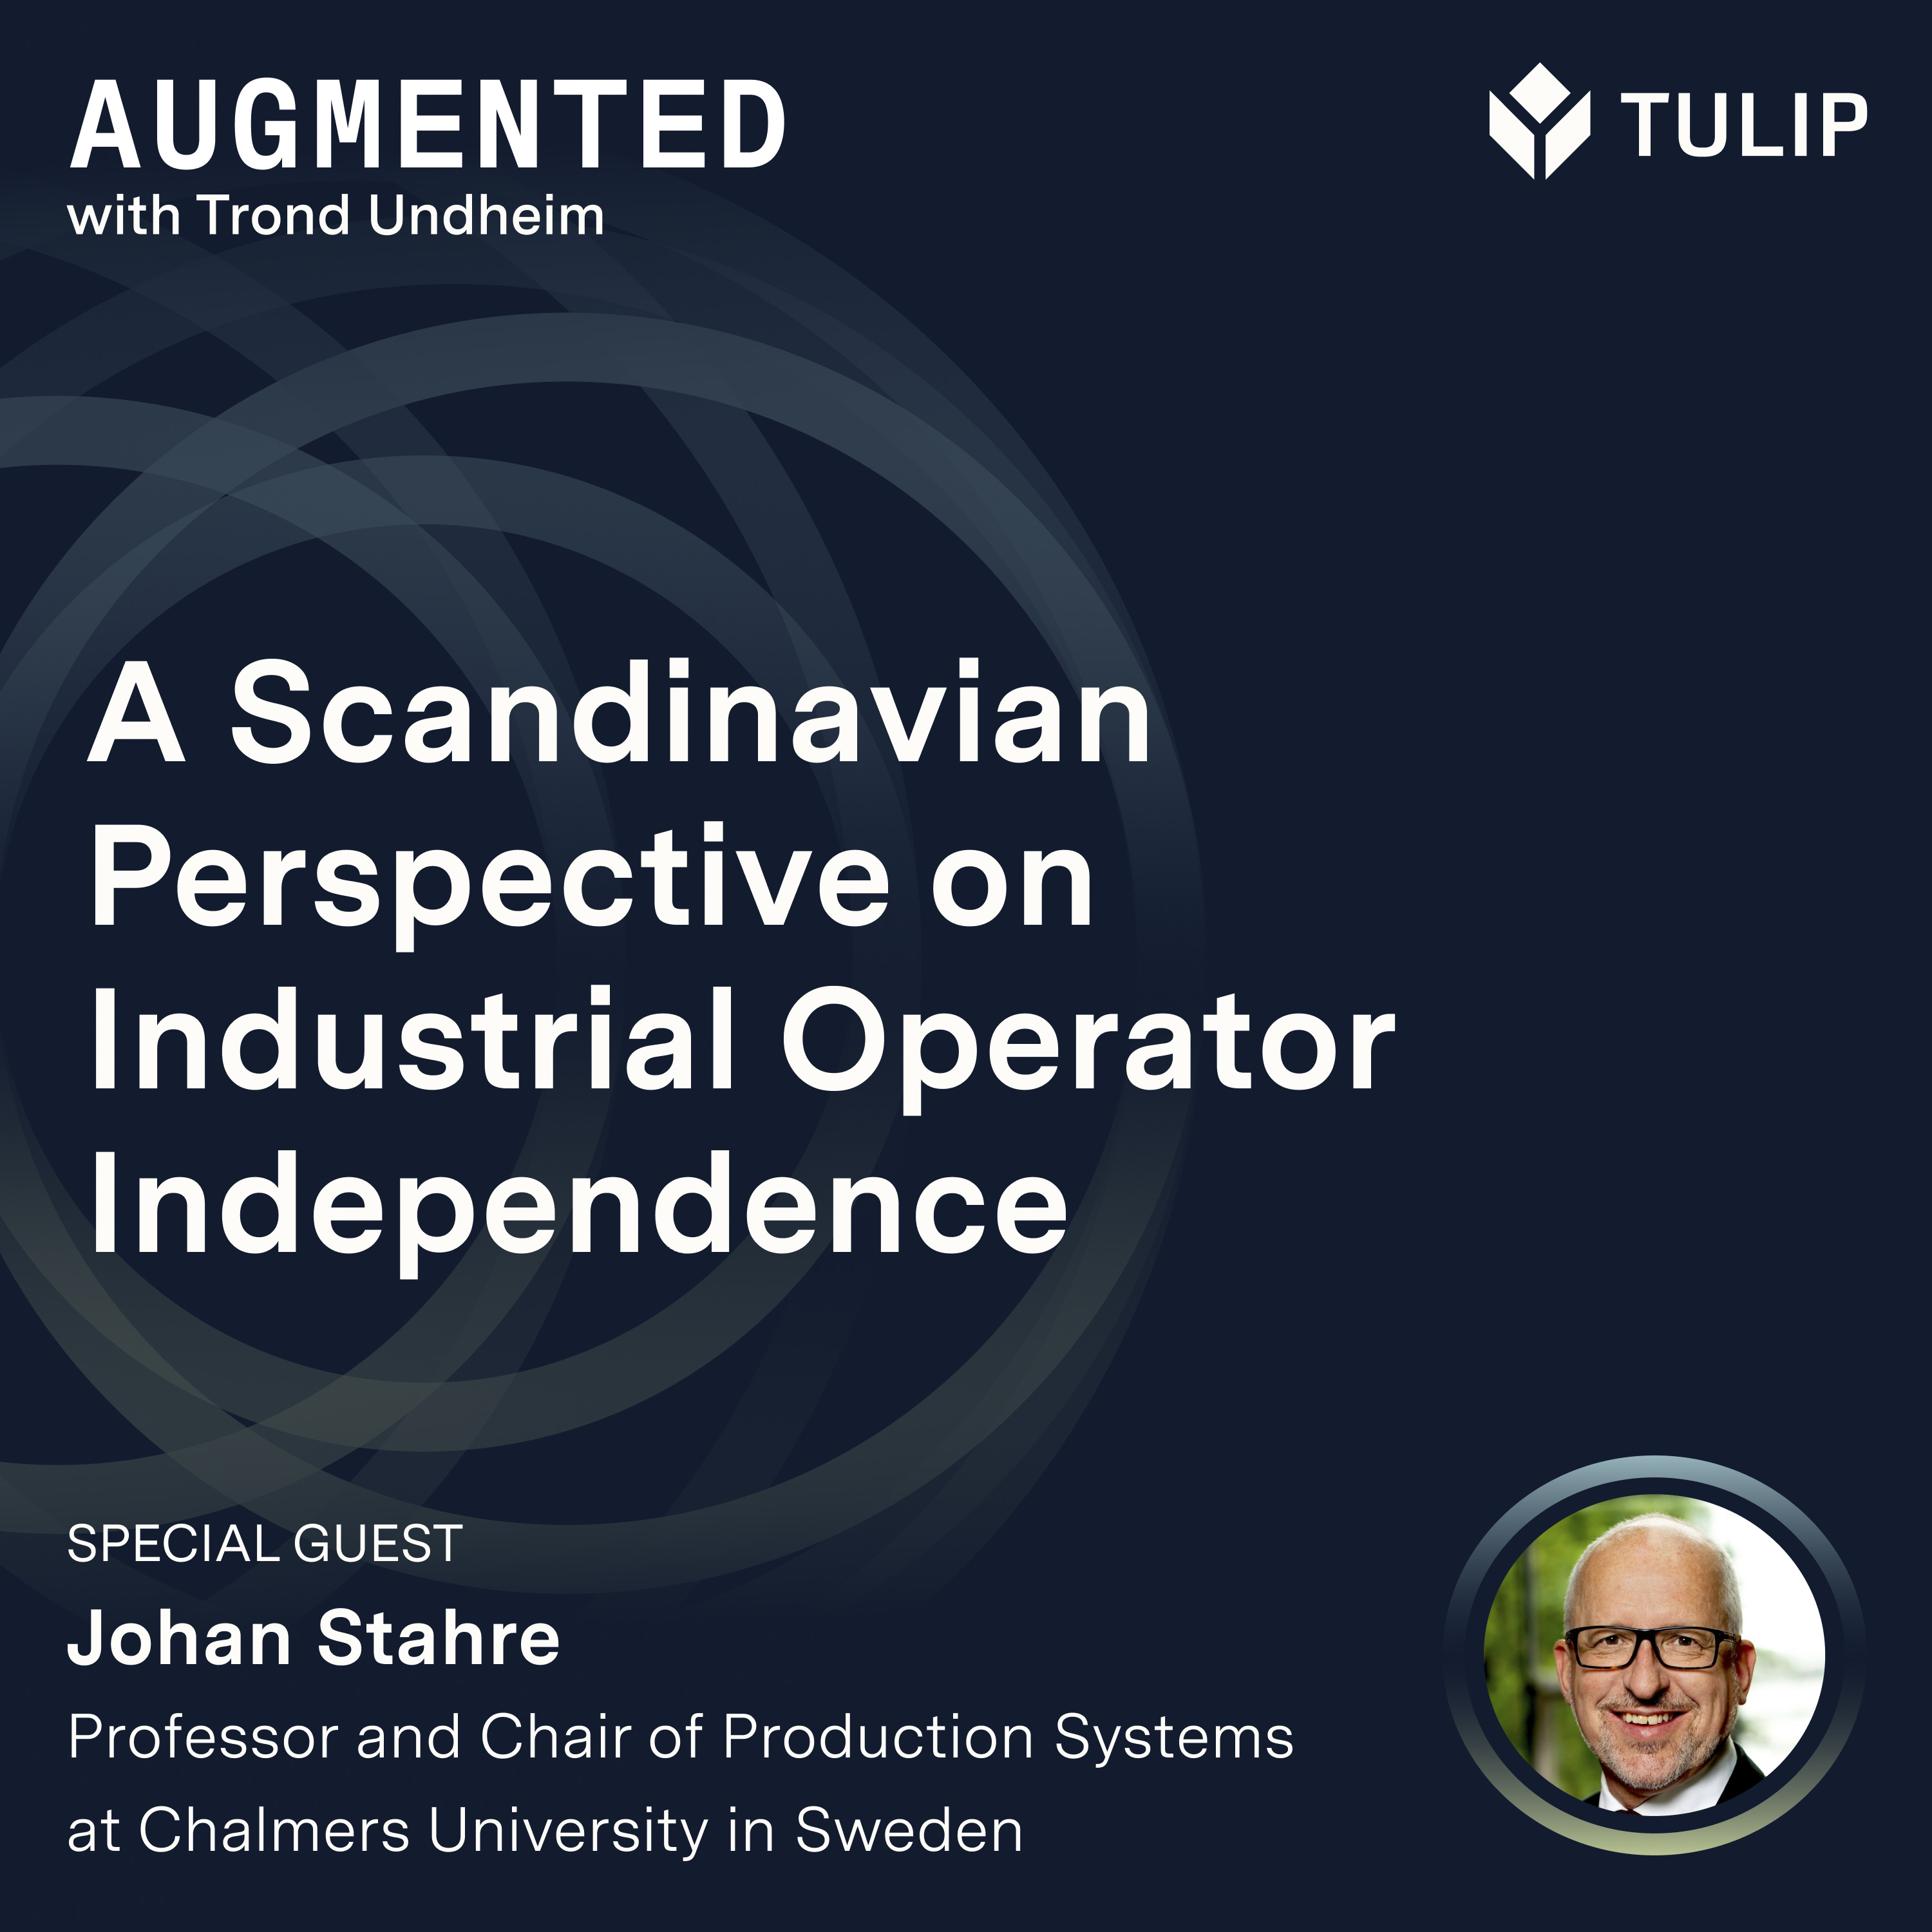 Episode 104: A Scandinavian Perspective on Industrial Operator Independence with Johan Stahre